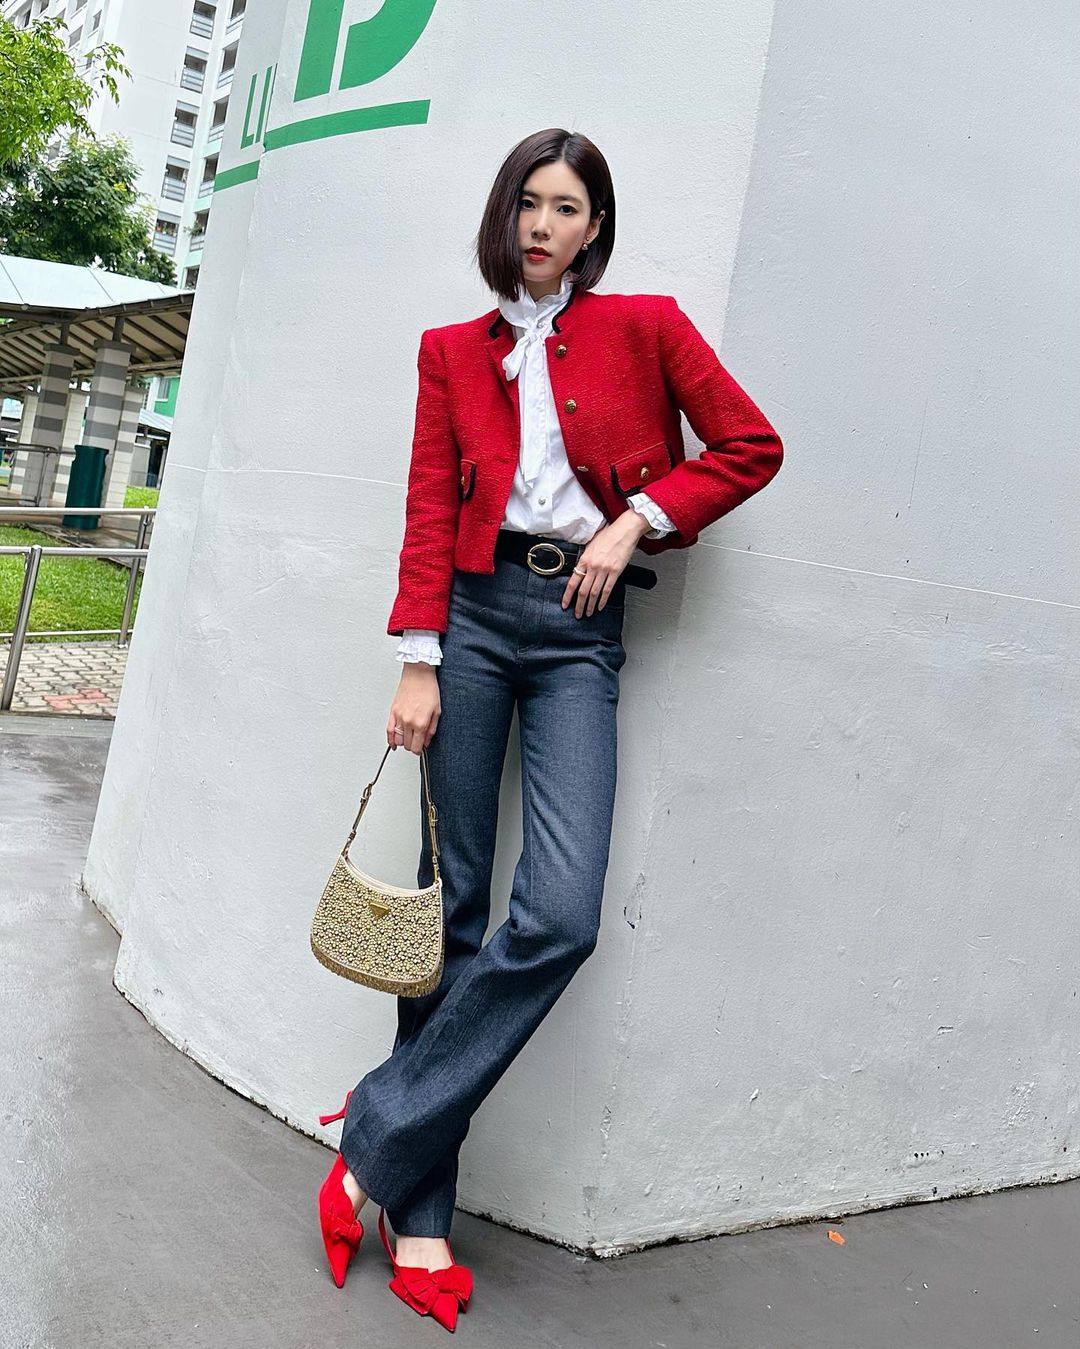 The easiest way to stand out in a crowd is to wear red – and brands like Gucci, Cartier and Van Cleef & Arpels can help you add just that pop of colour this Chinese New Year. Photo: @carriewst/Instagram